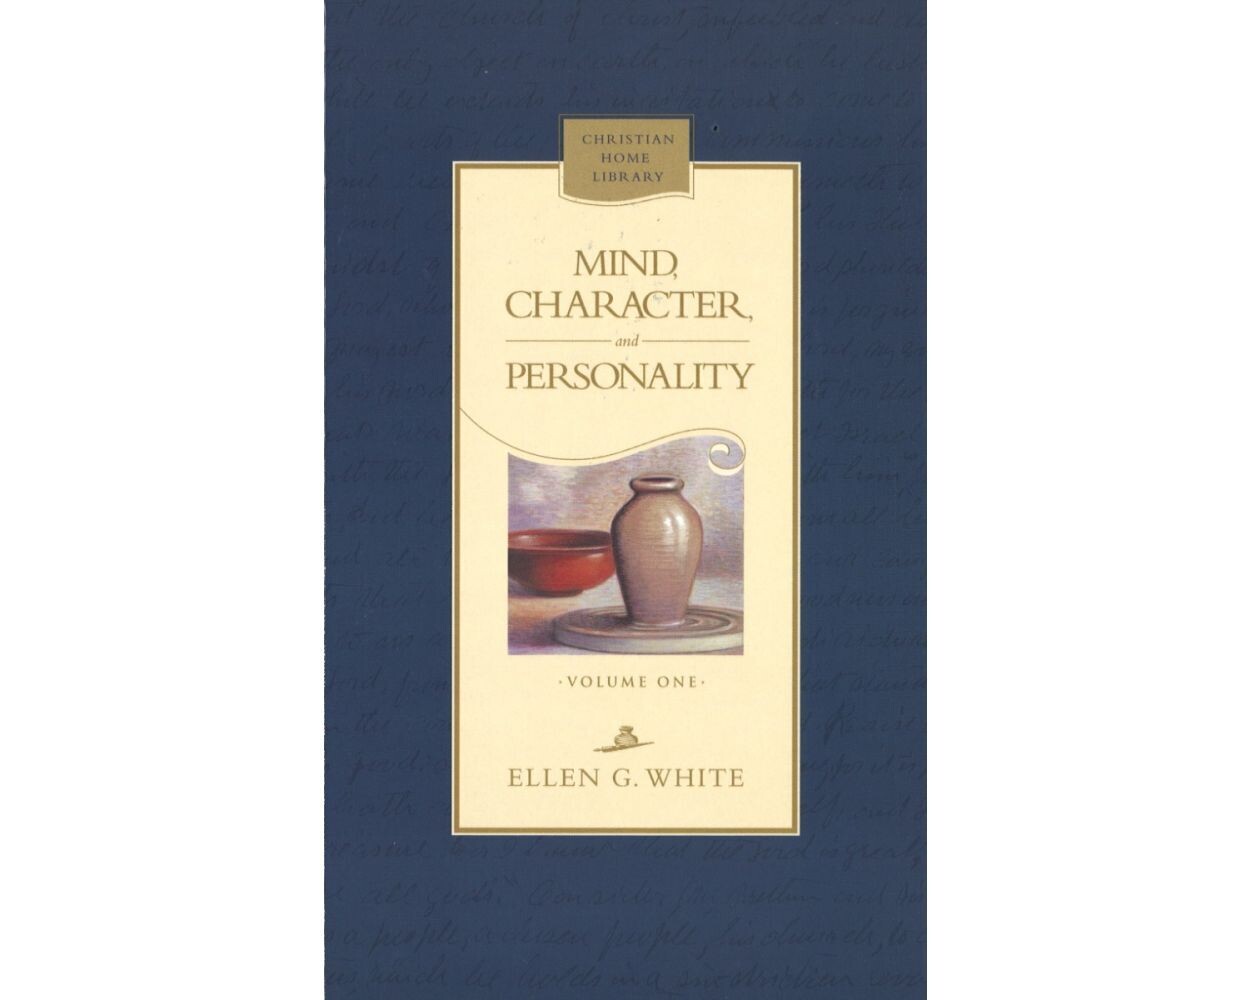  Mind, Character and Personality Volume 1 - EGW